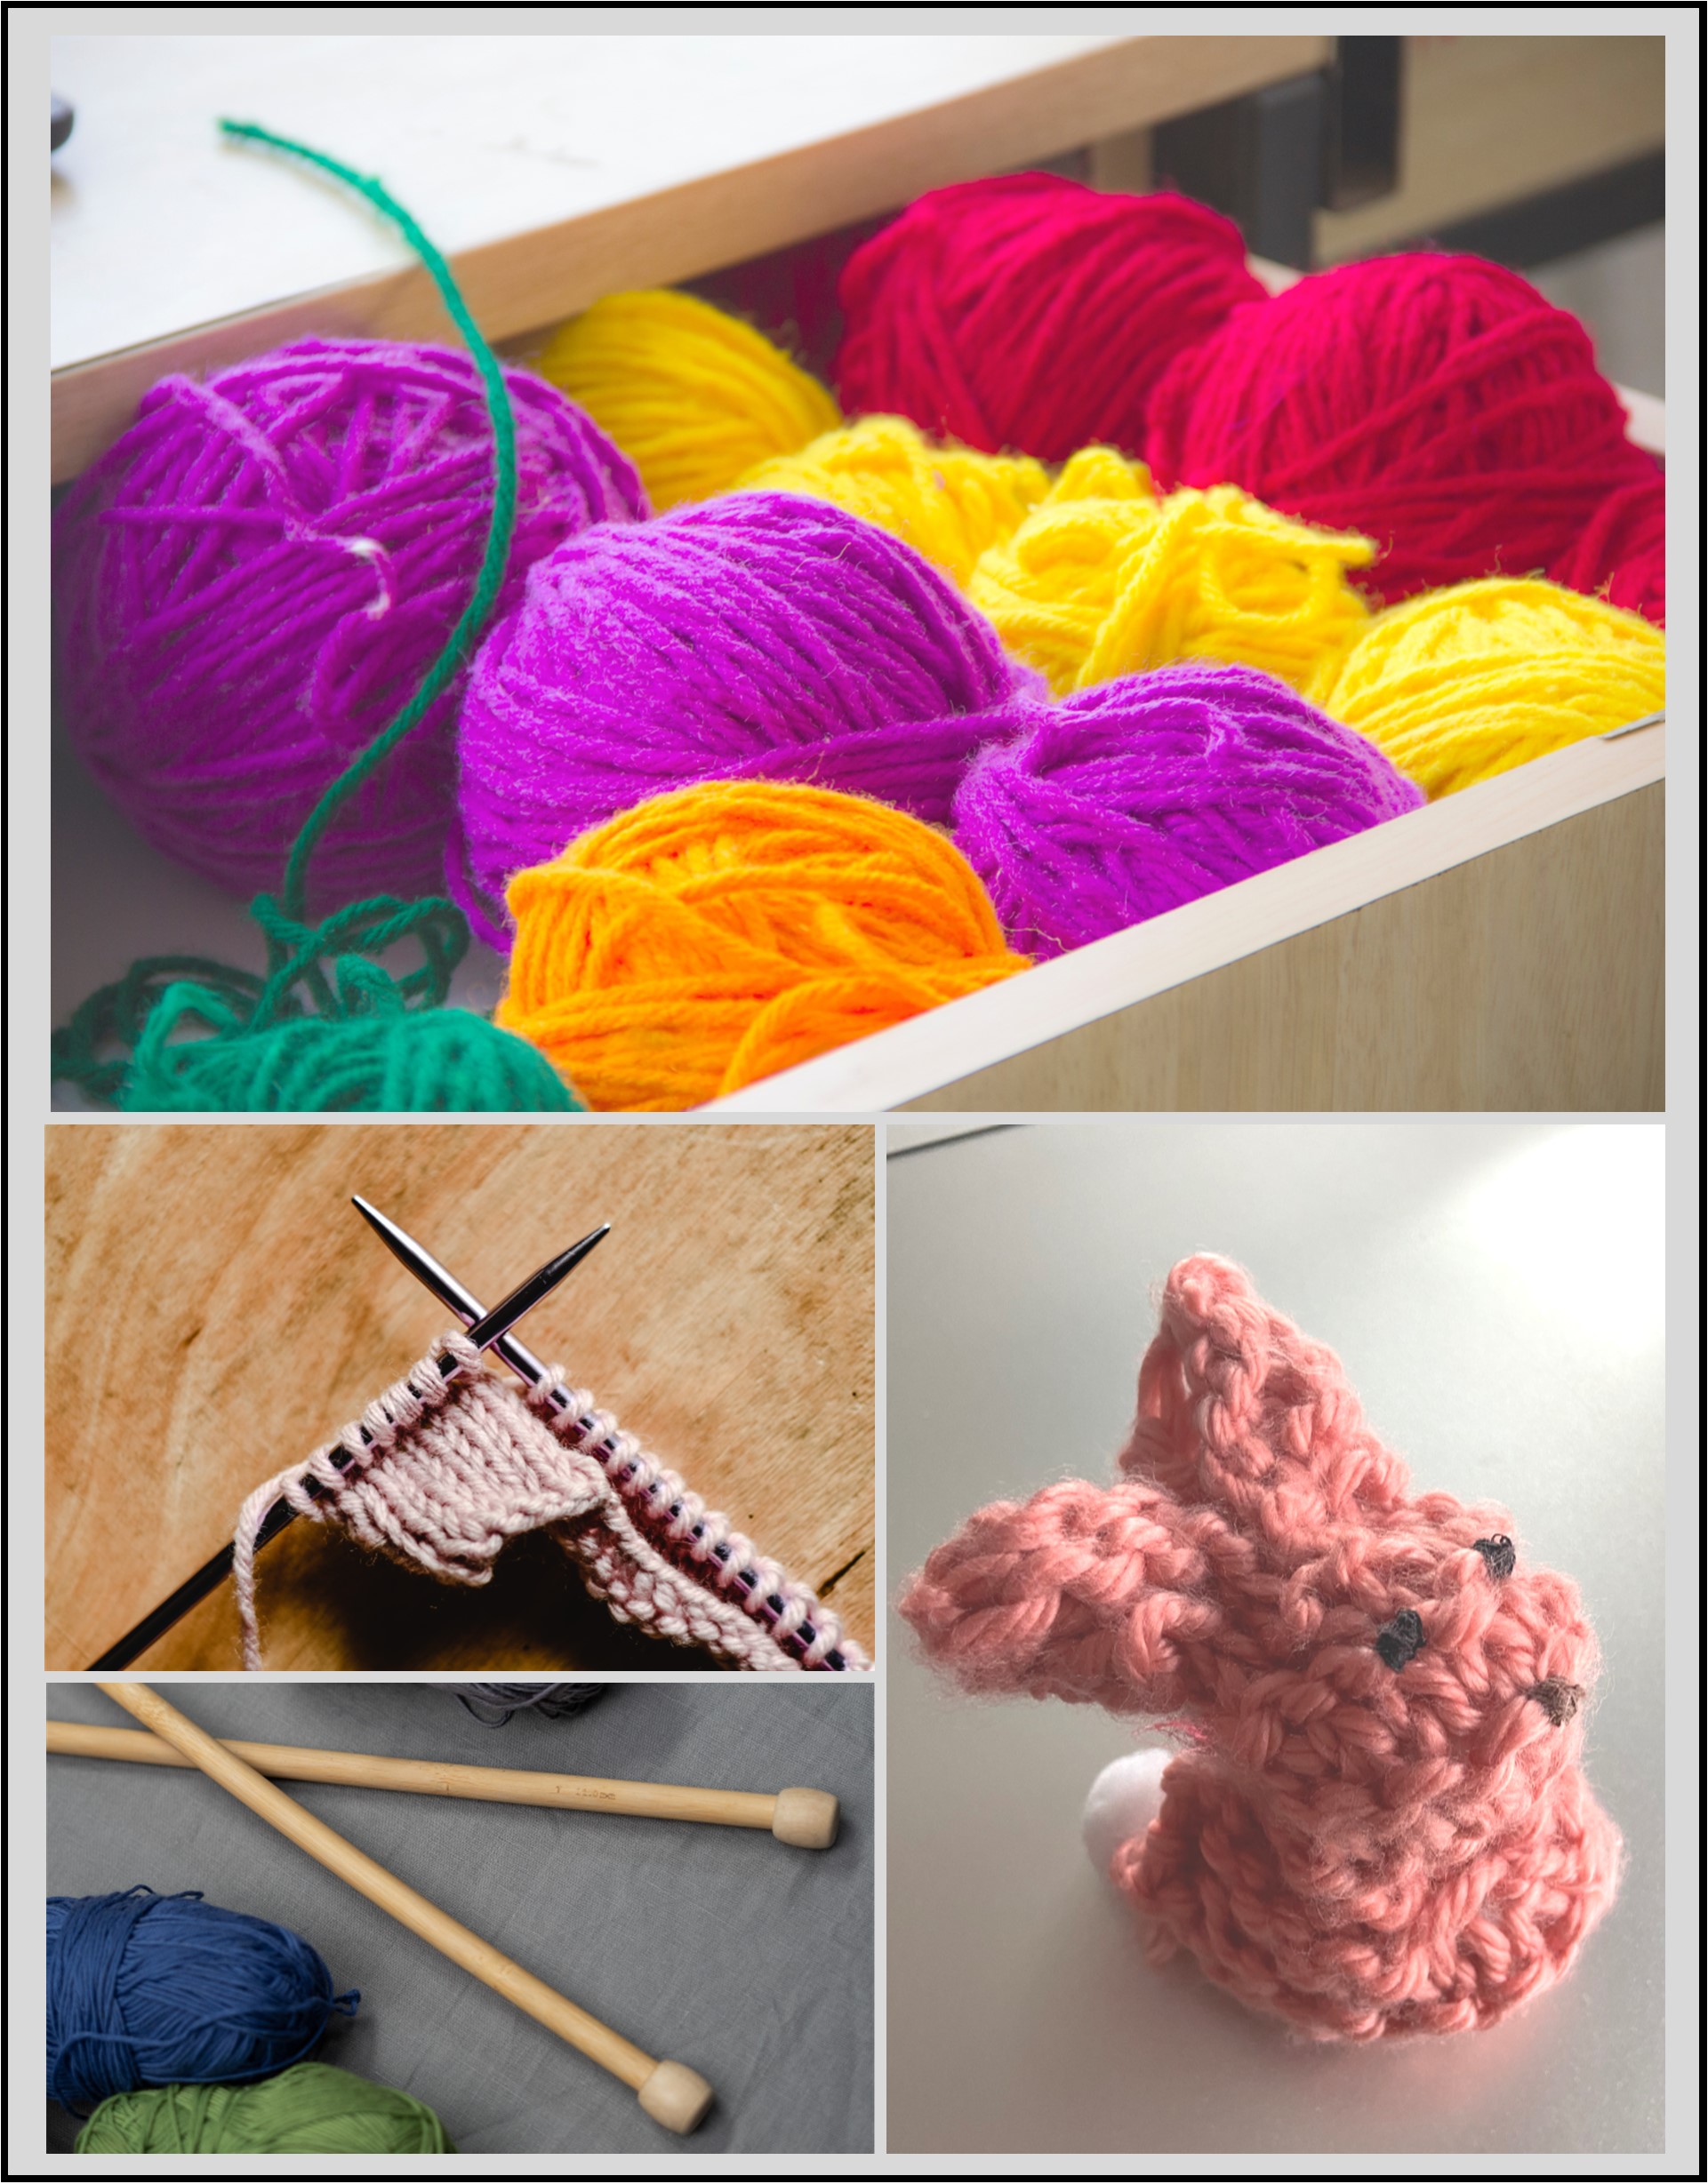 colorful balls of yarn in a box, knitting needles and yarn, and a knitted bunny